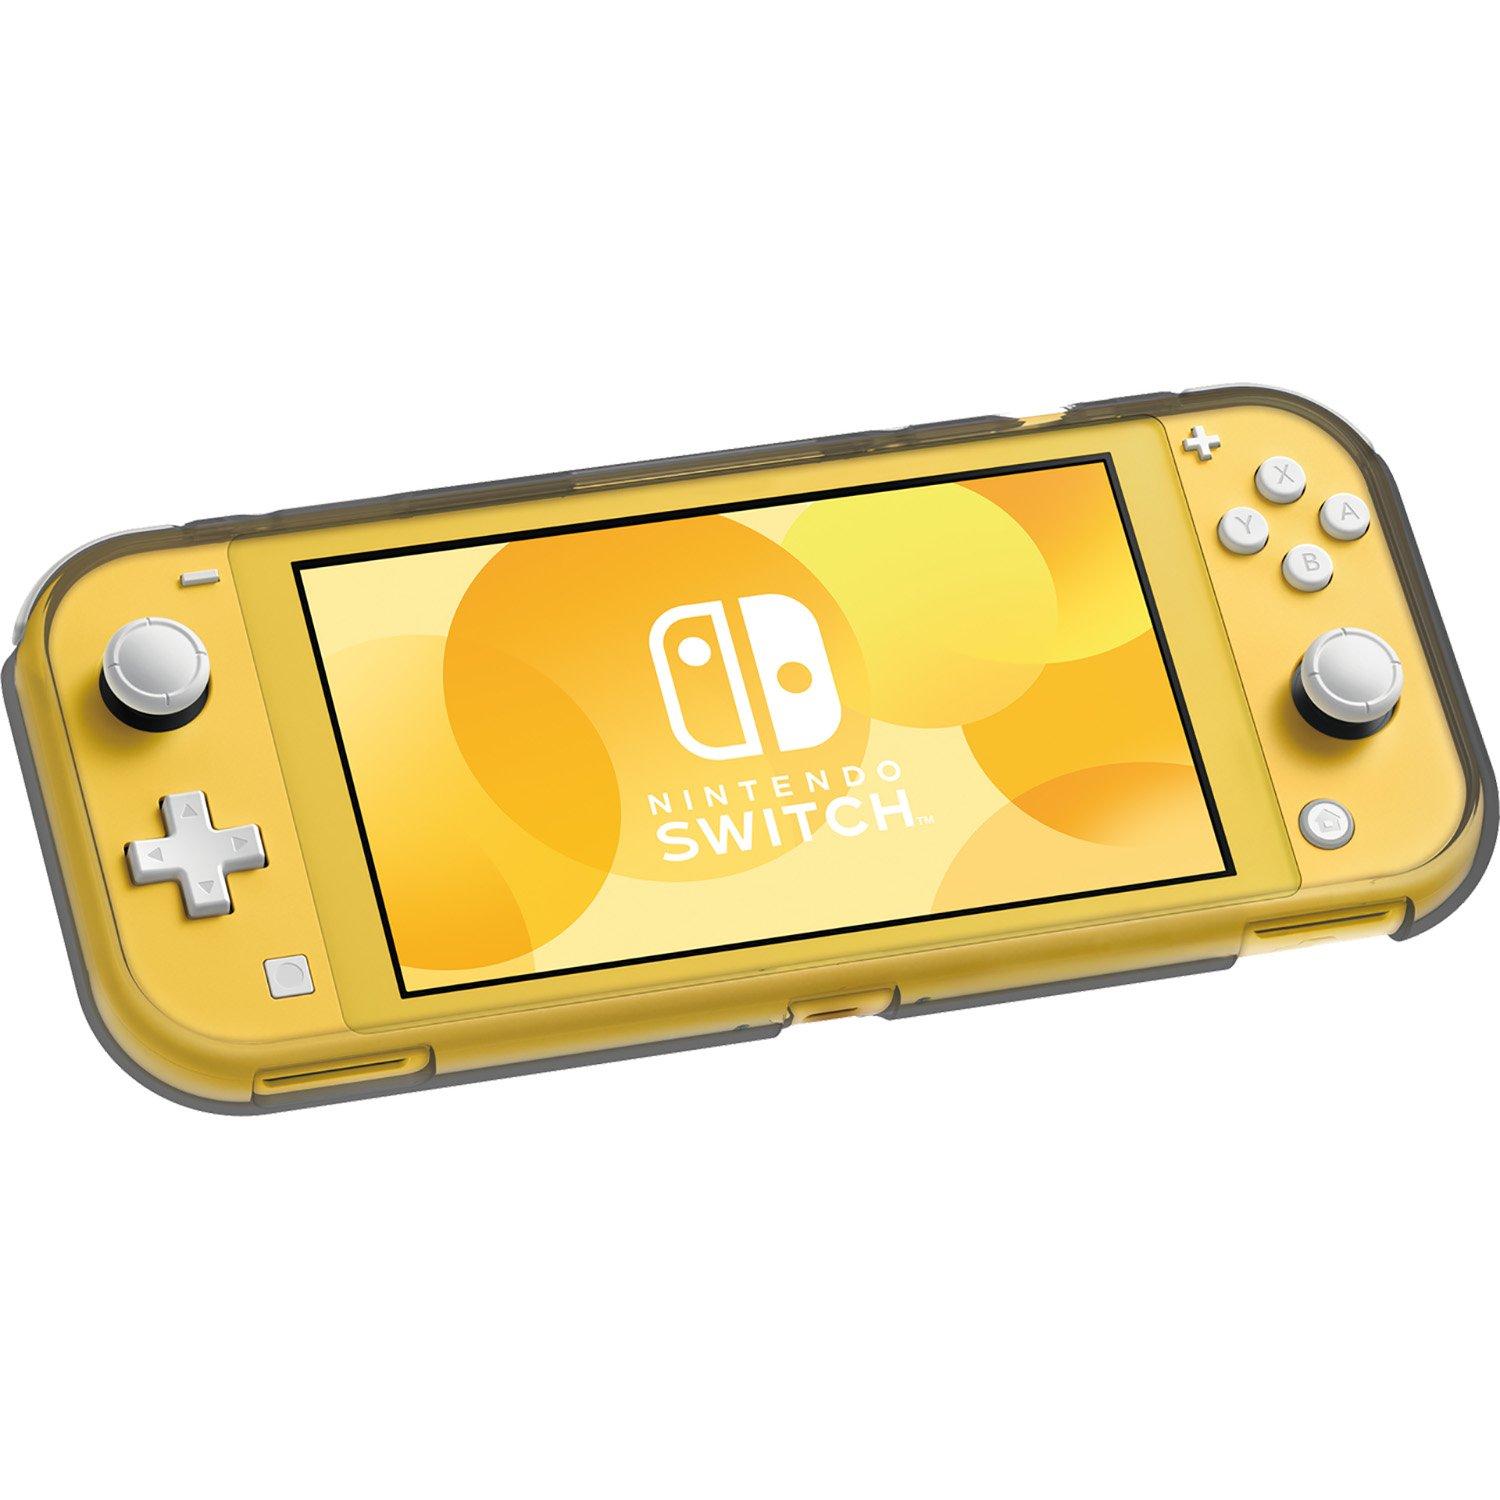 switch lite pre owned gamestop